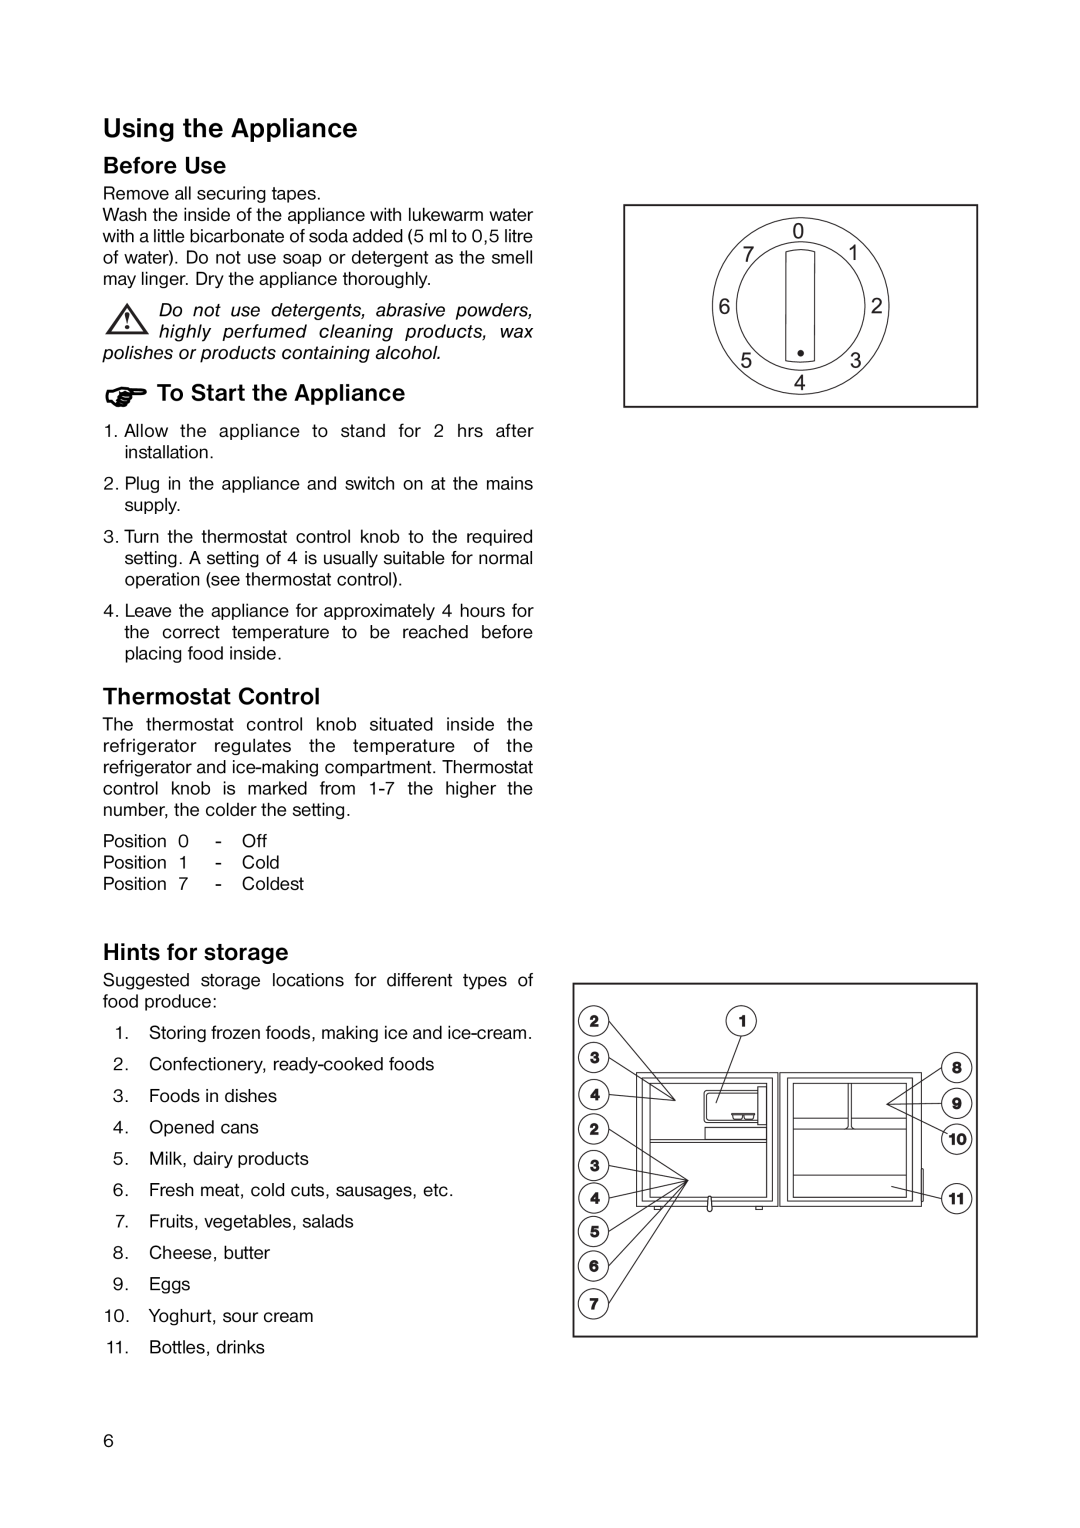 Zanussi ZERC 0750 manual Using the Appliance, Before Use, To Start the Appliance, Thermostat Control, Hints for storage 